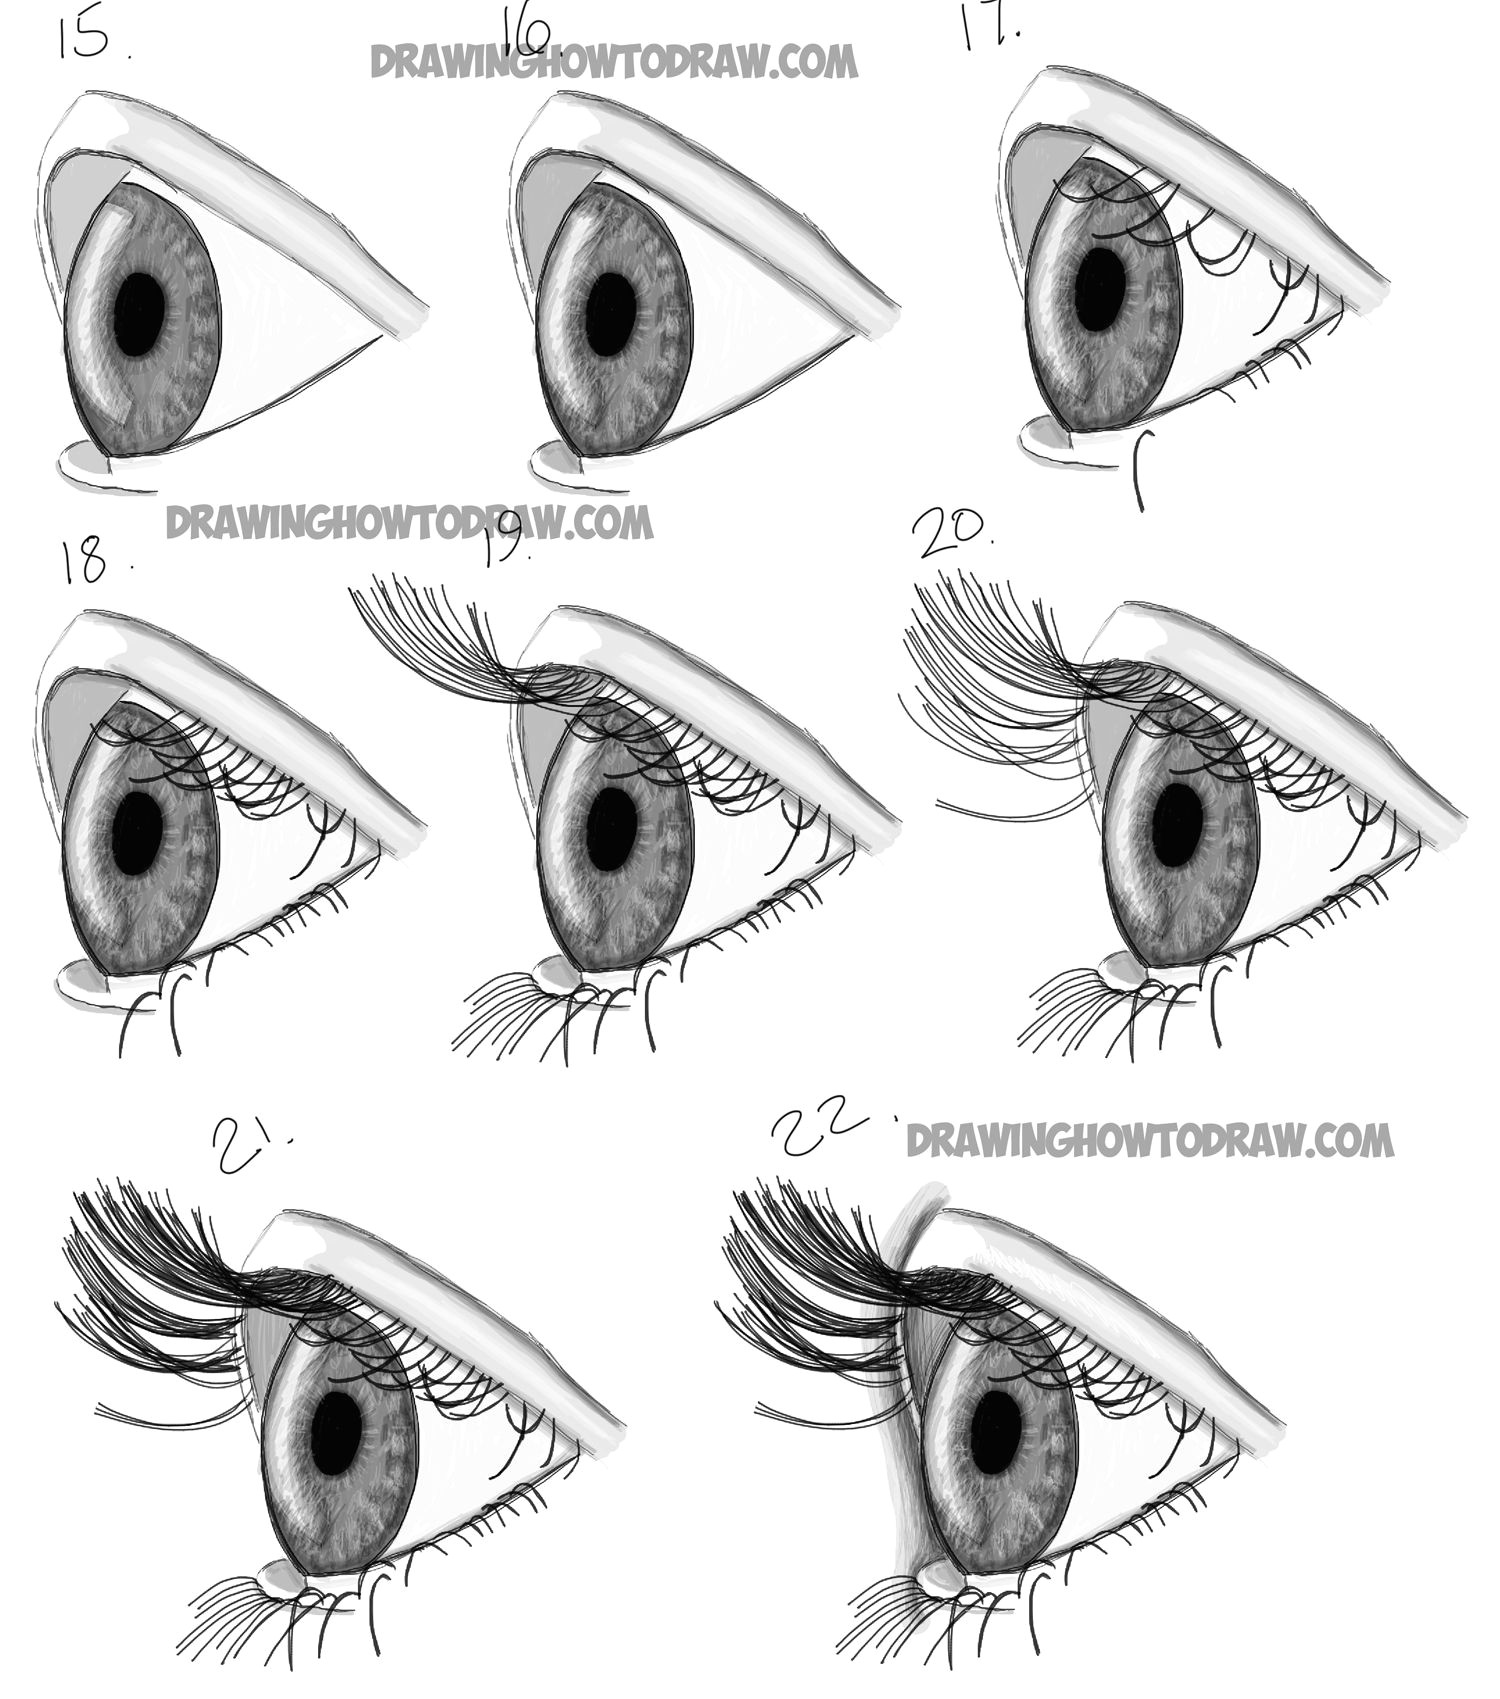 instructions on how to draw an eye all respect to artist i